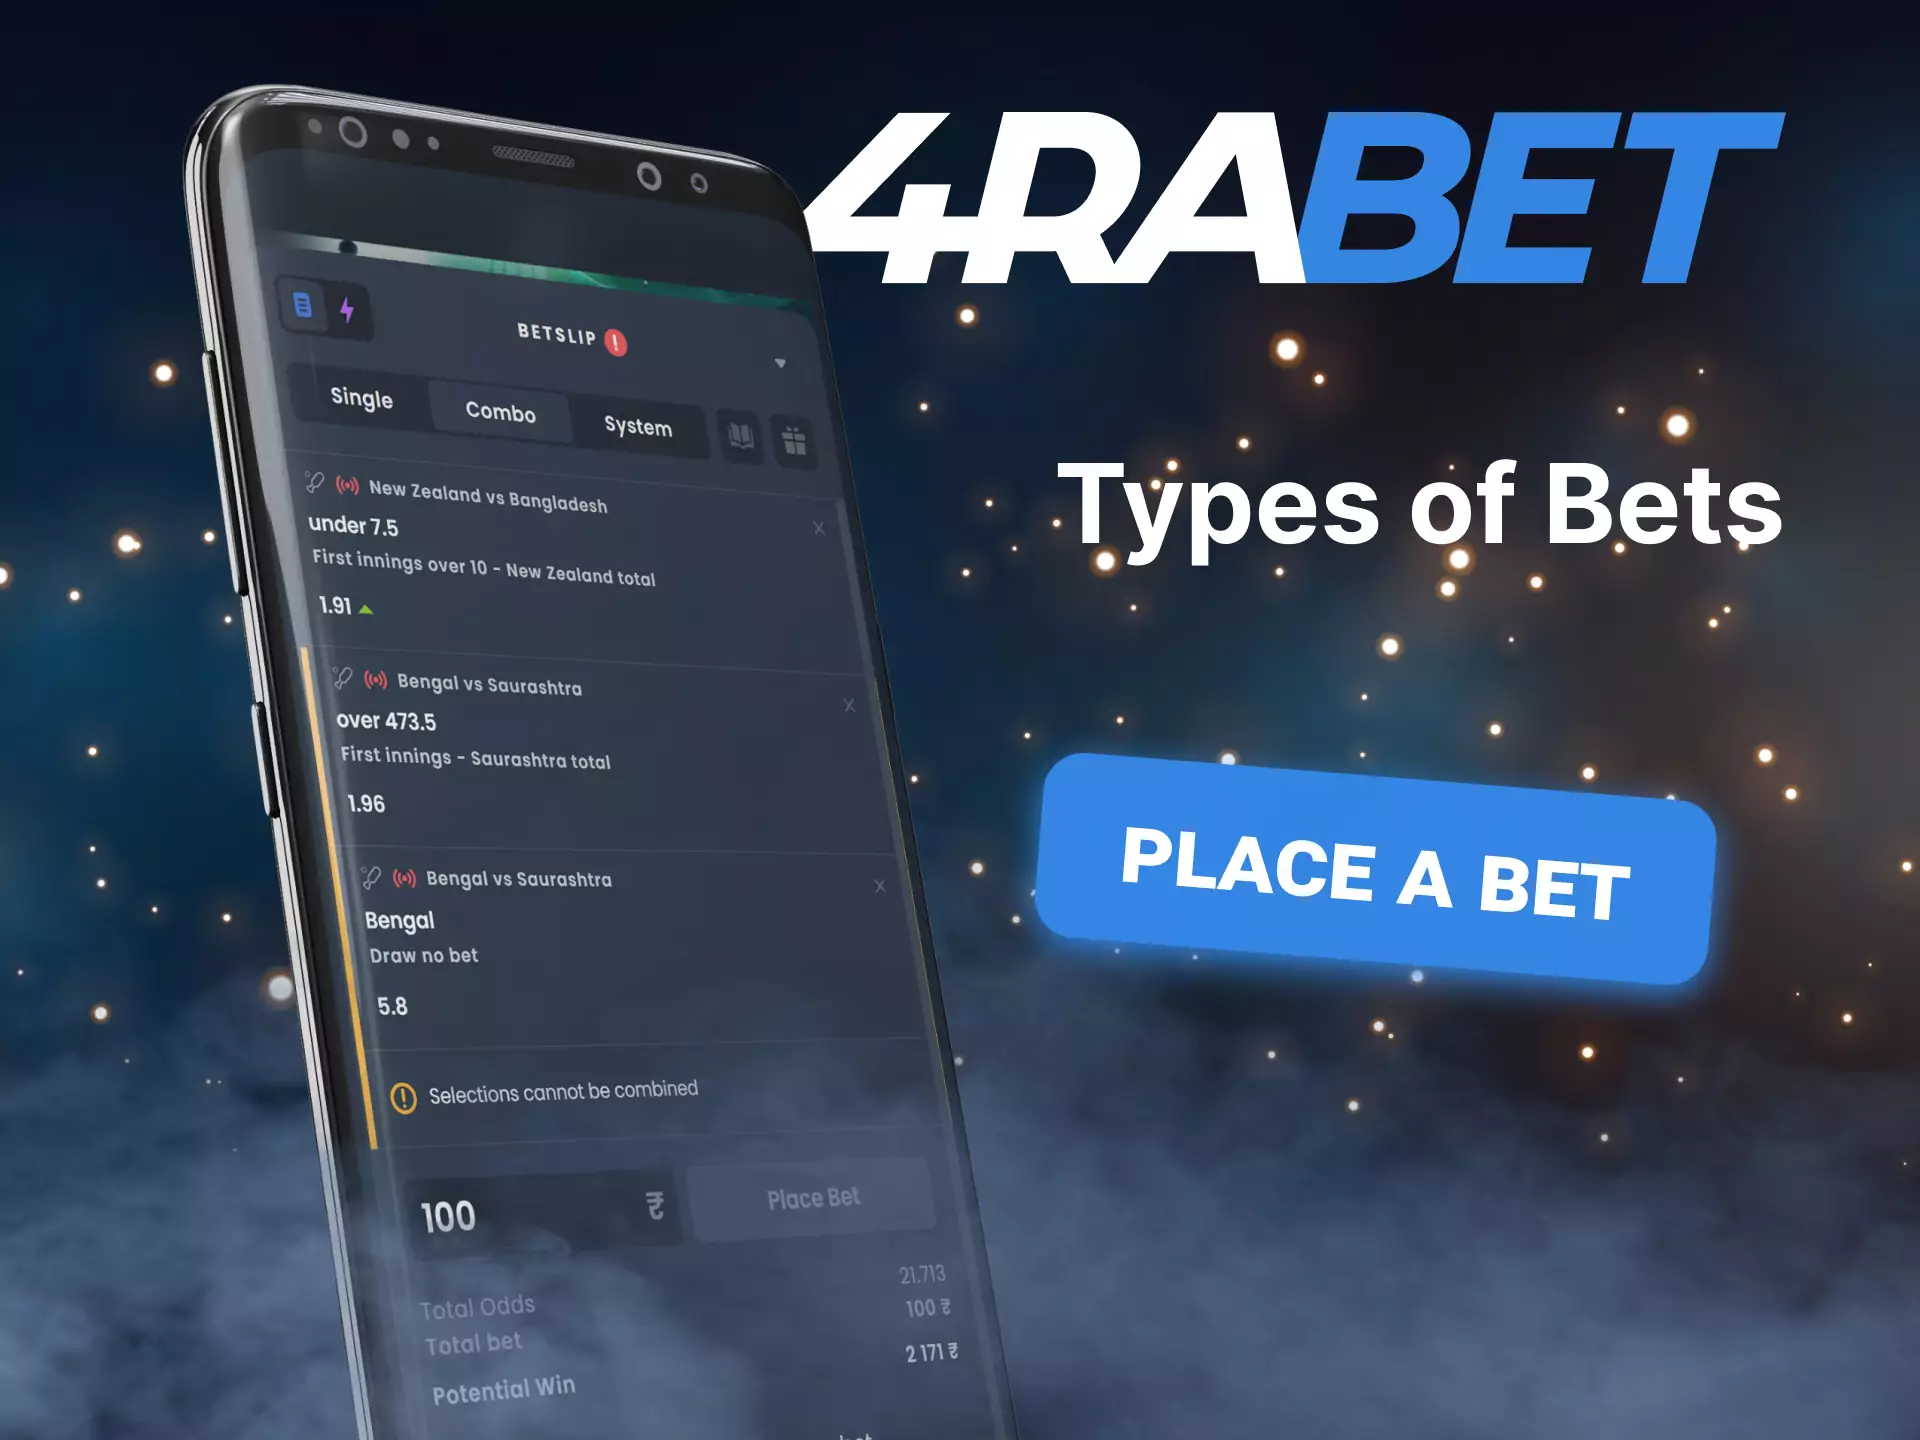 In the mobile app 4rabet try different types of bets.